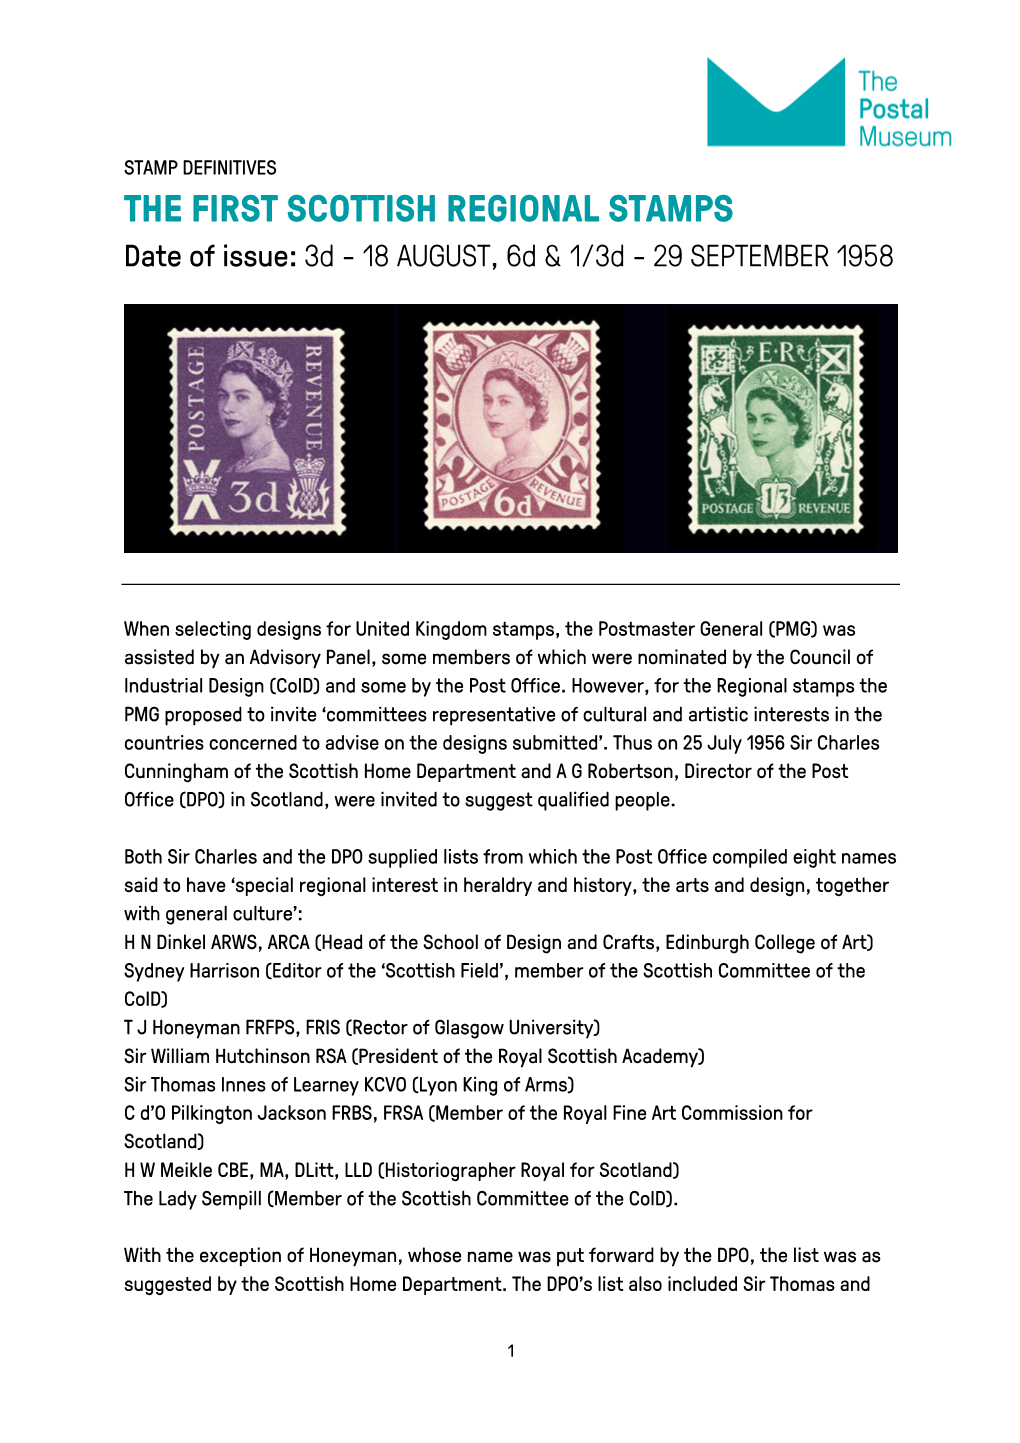 THE FIRST SCOTTISH REGIONAL STAMPS Date of Issue: 3D - 18 AUGUST, 6D & 1/3D - 29 SEPTEMBER 1958